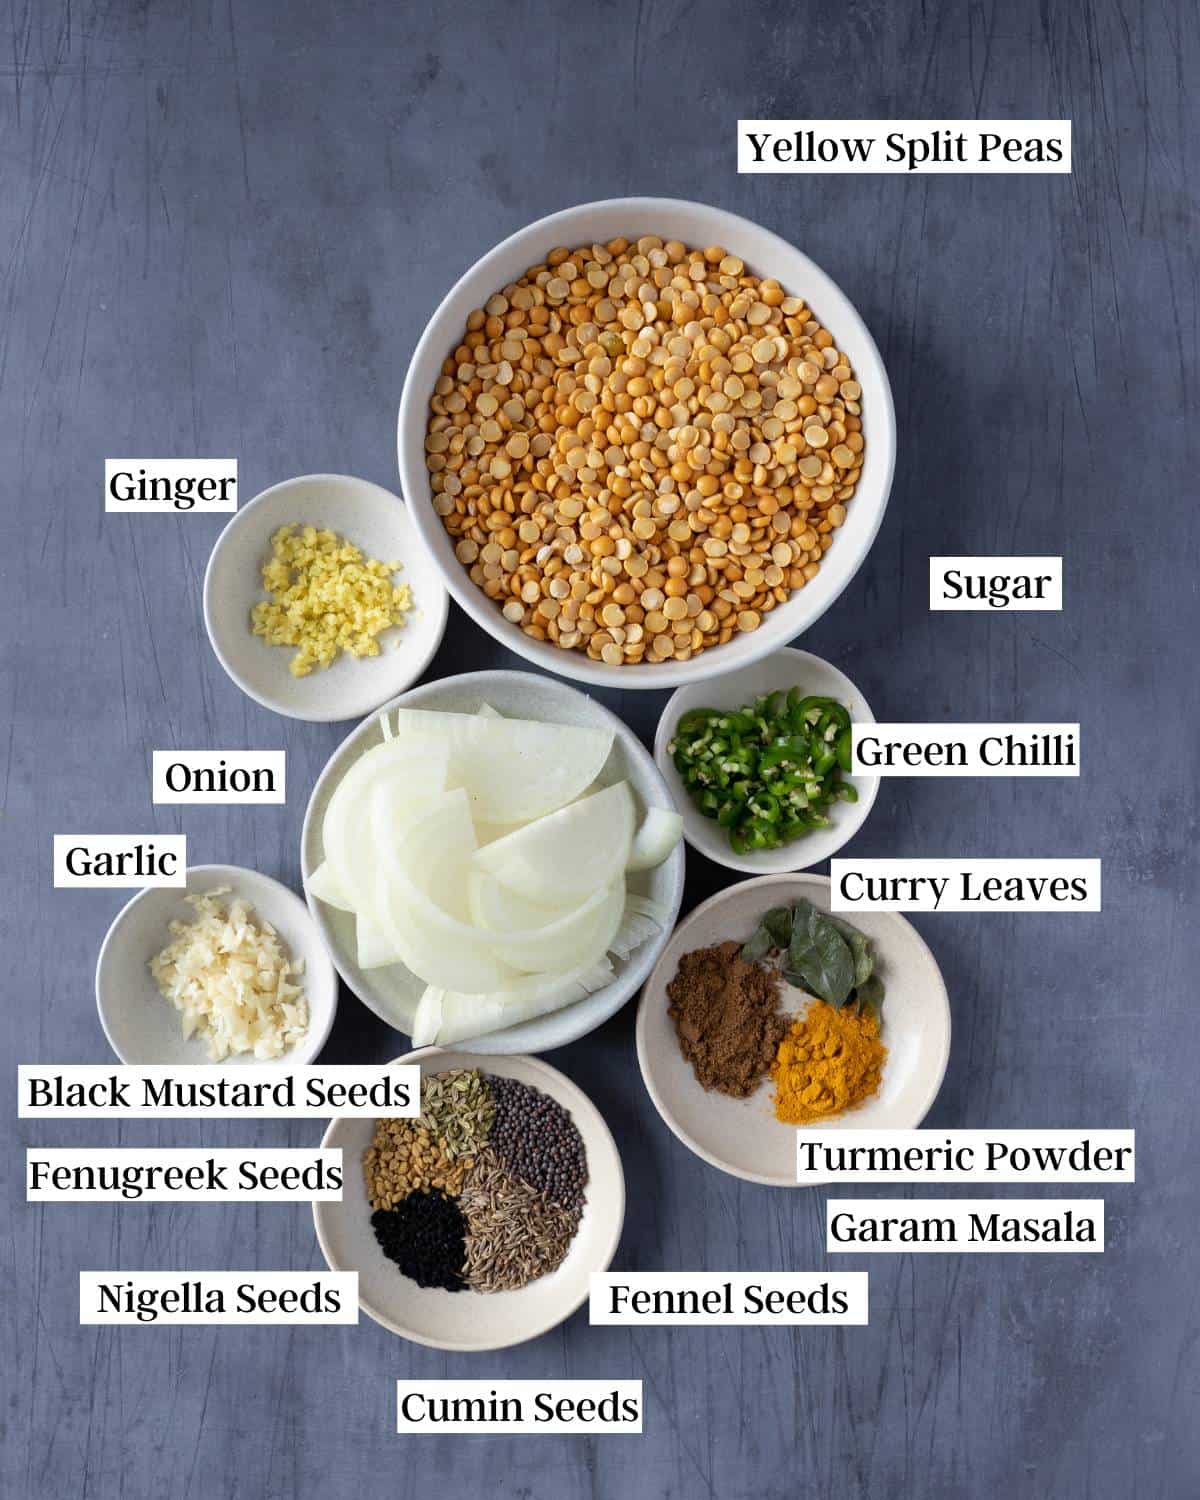 Ingredients for matar dal on a darl surface.